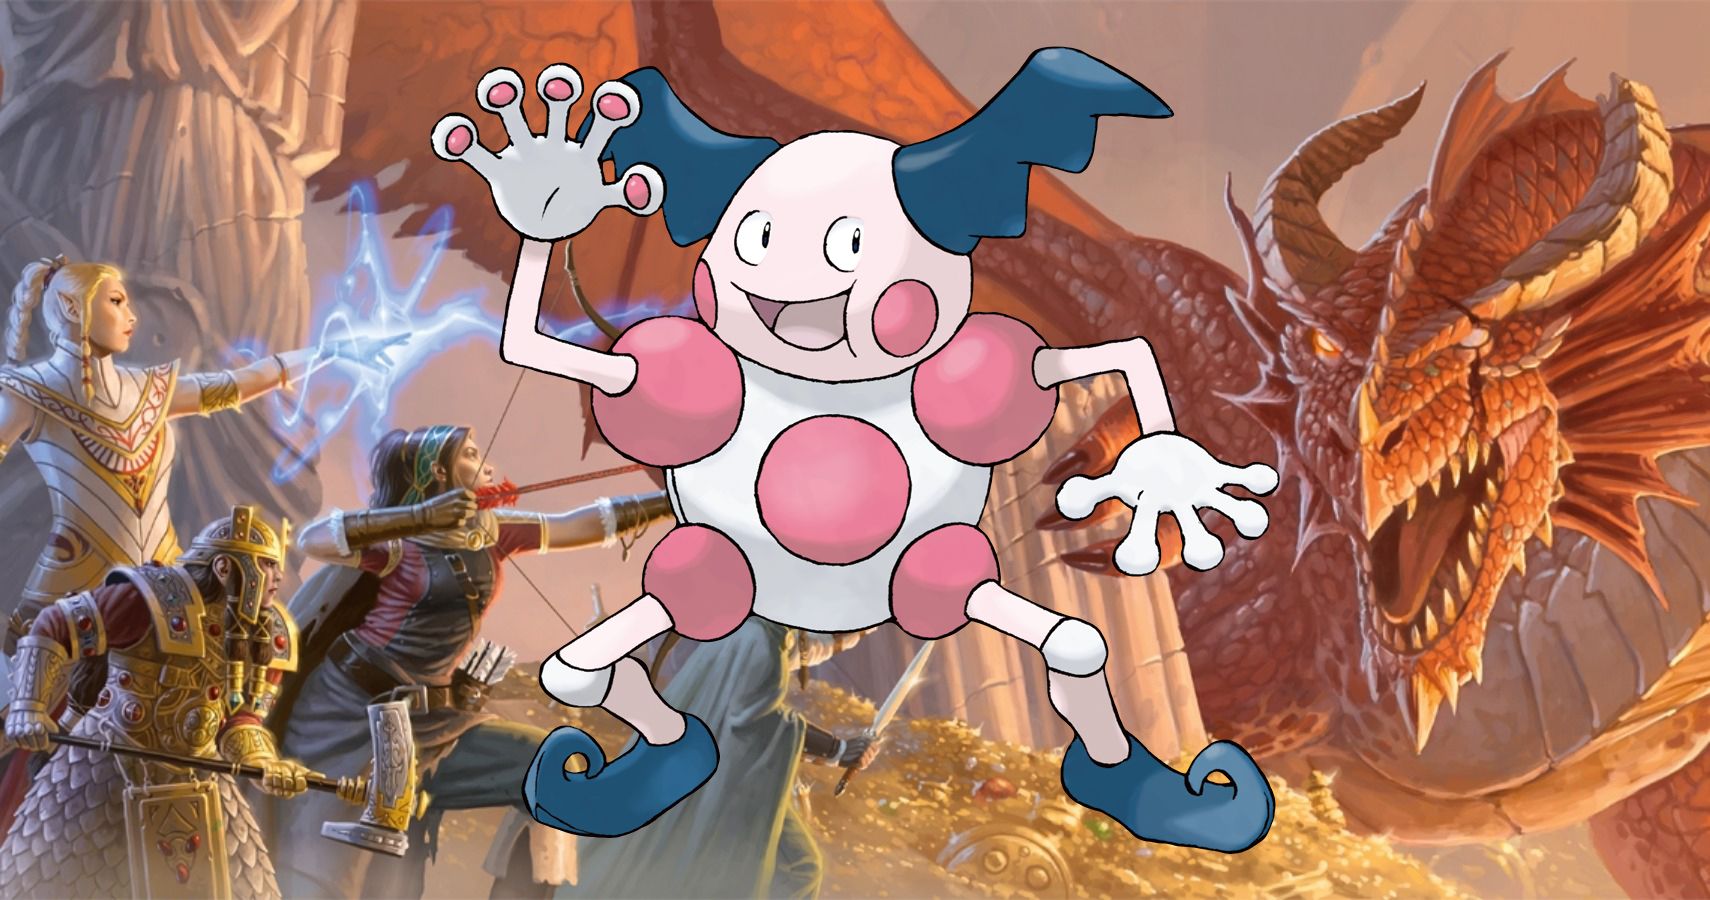 How To Turn Mr Mime From Pokemon Into A D&D Monster